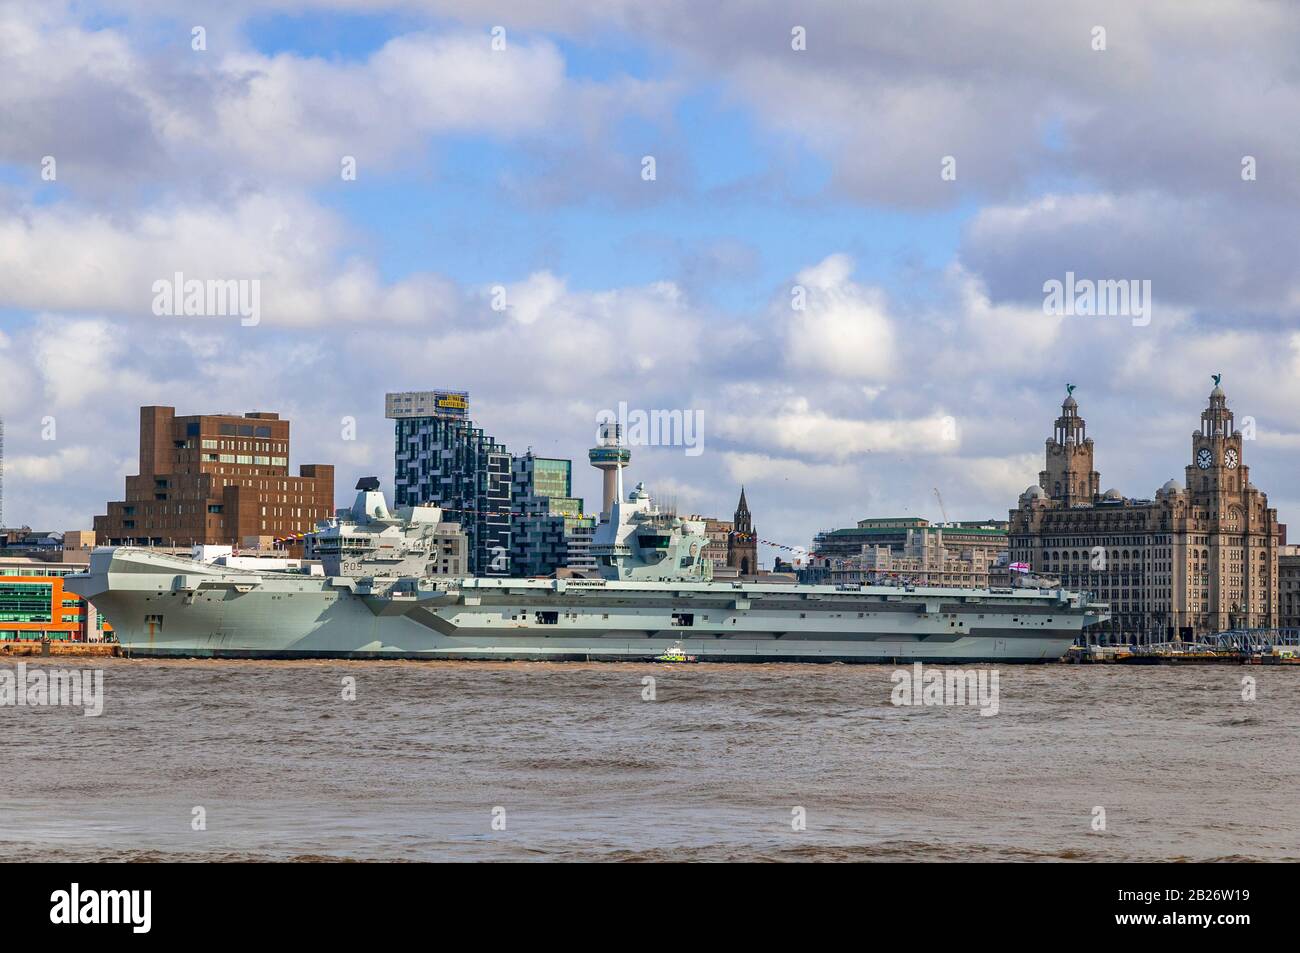 The Royal Navy's latest aircraft carrier HMS Prince of Wales berthed at Liverpool pierhead on a courtesy visit. Stock Photo